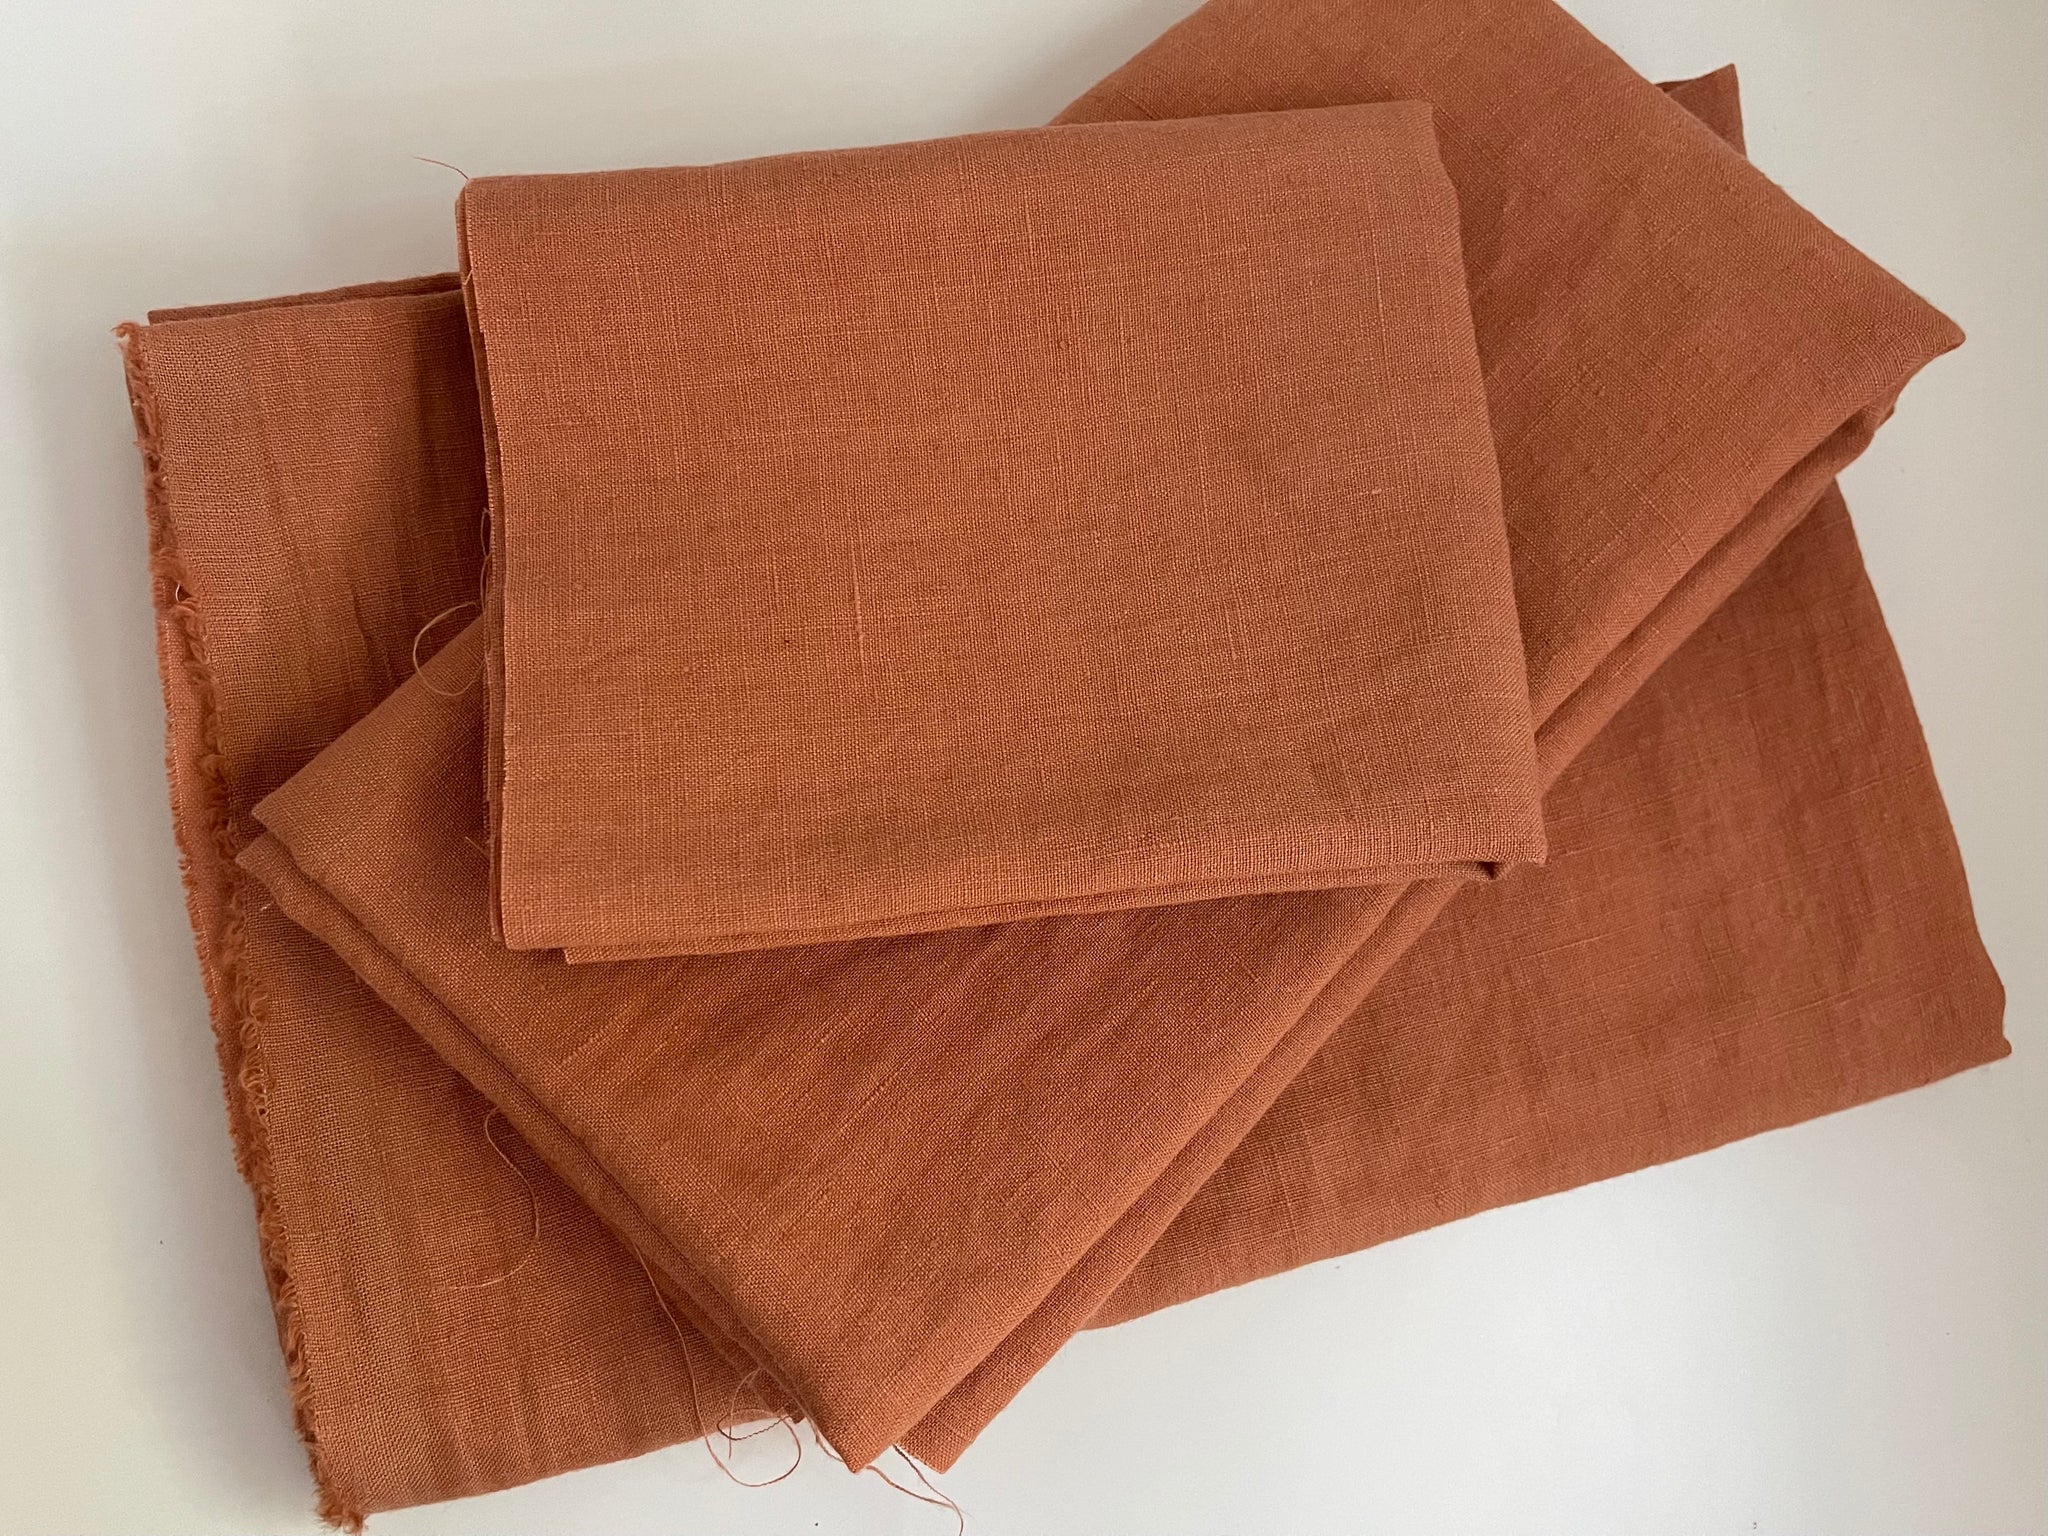 Linen Fabric Remnants - Terracotta - over 2.5 yards